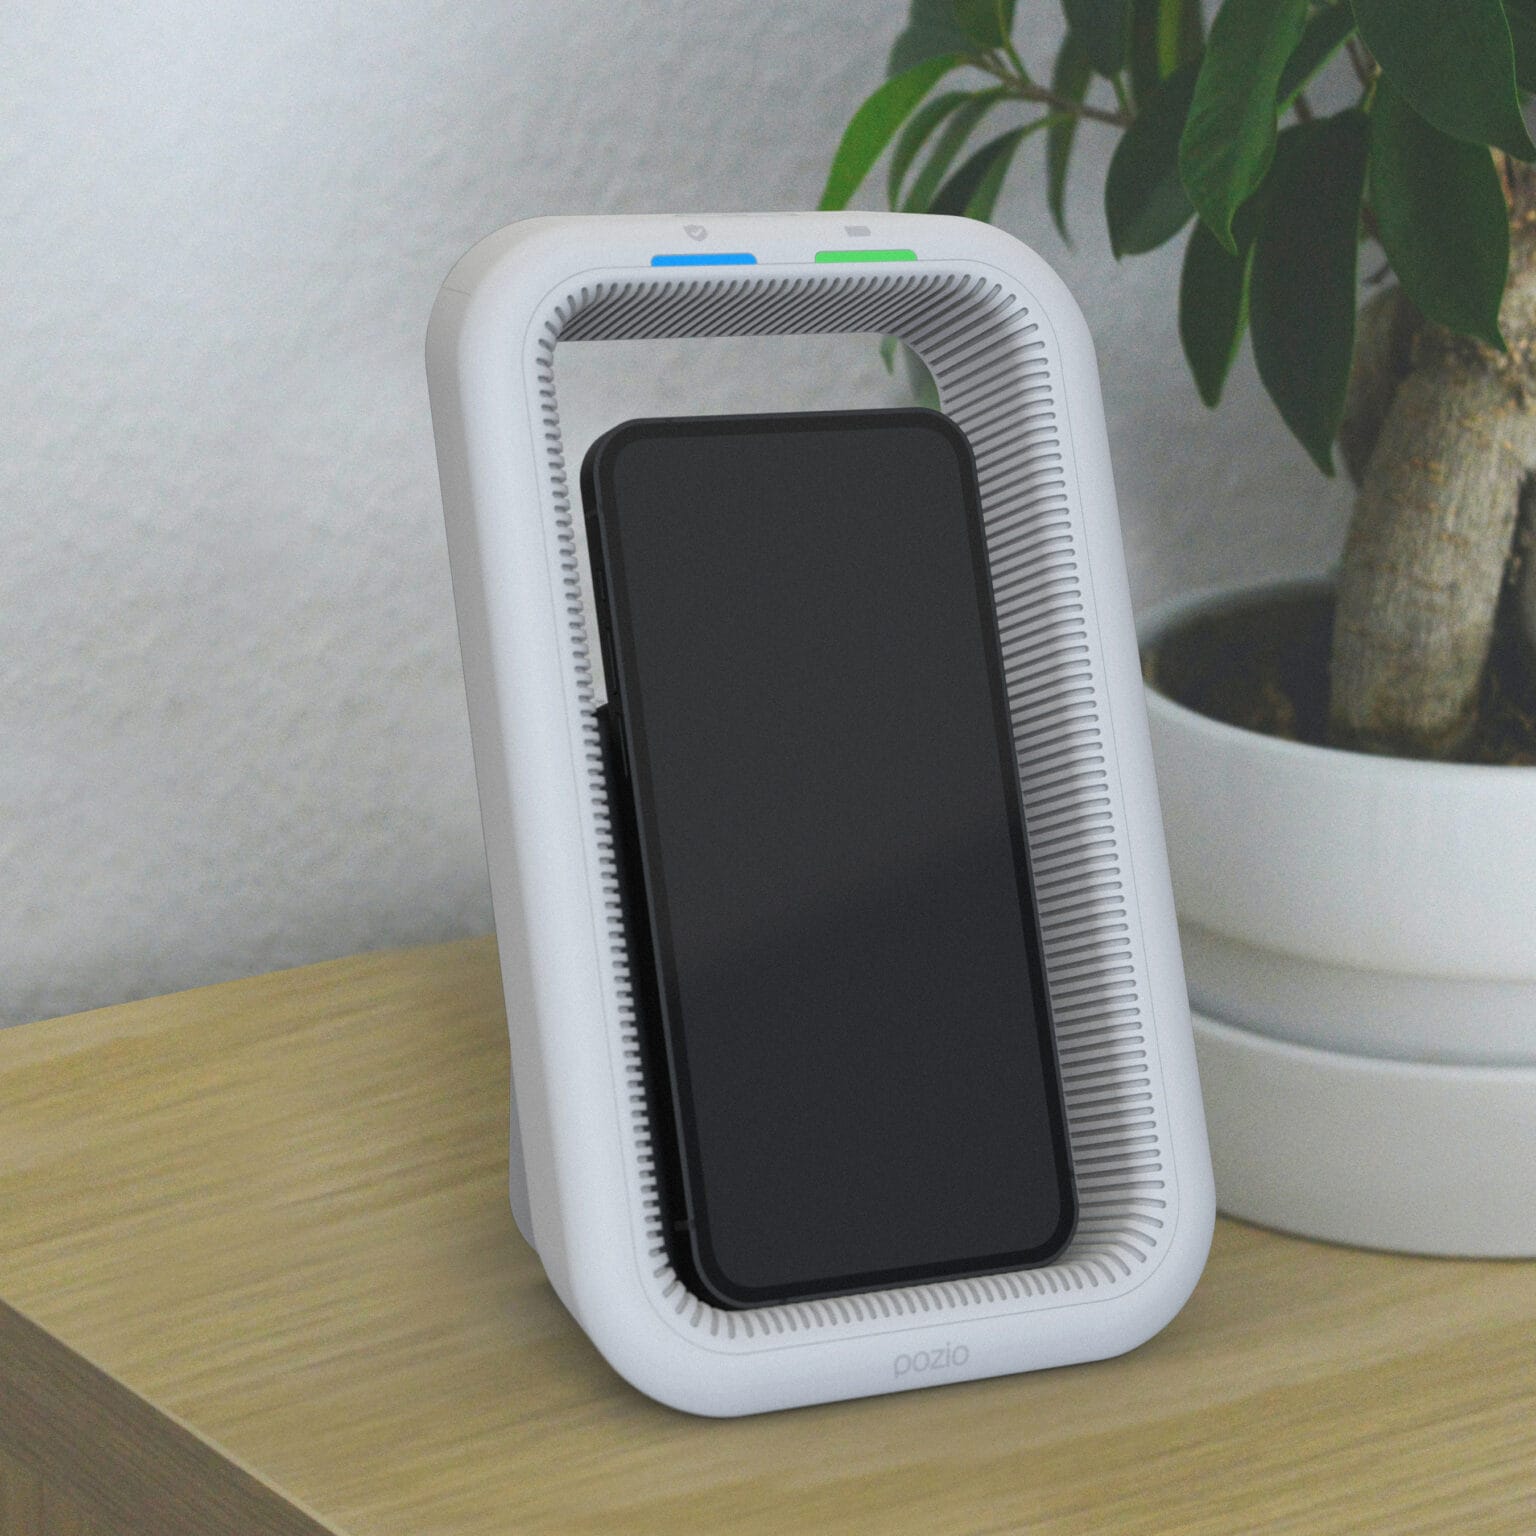 The Pozio Cradle is a wireless charger that jams your smartphone's ability to hear you until you tell it to stop.